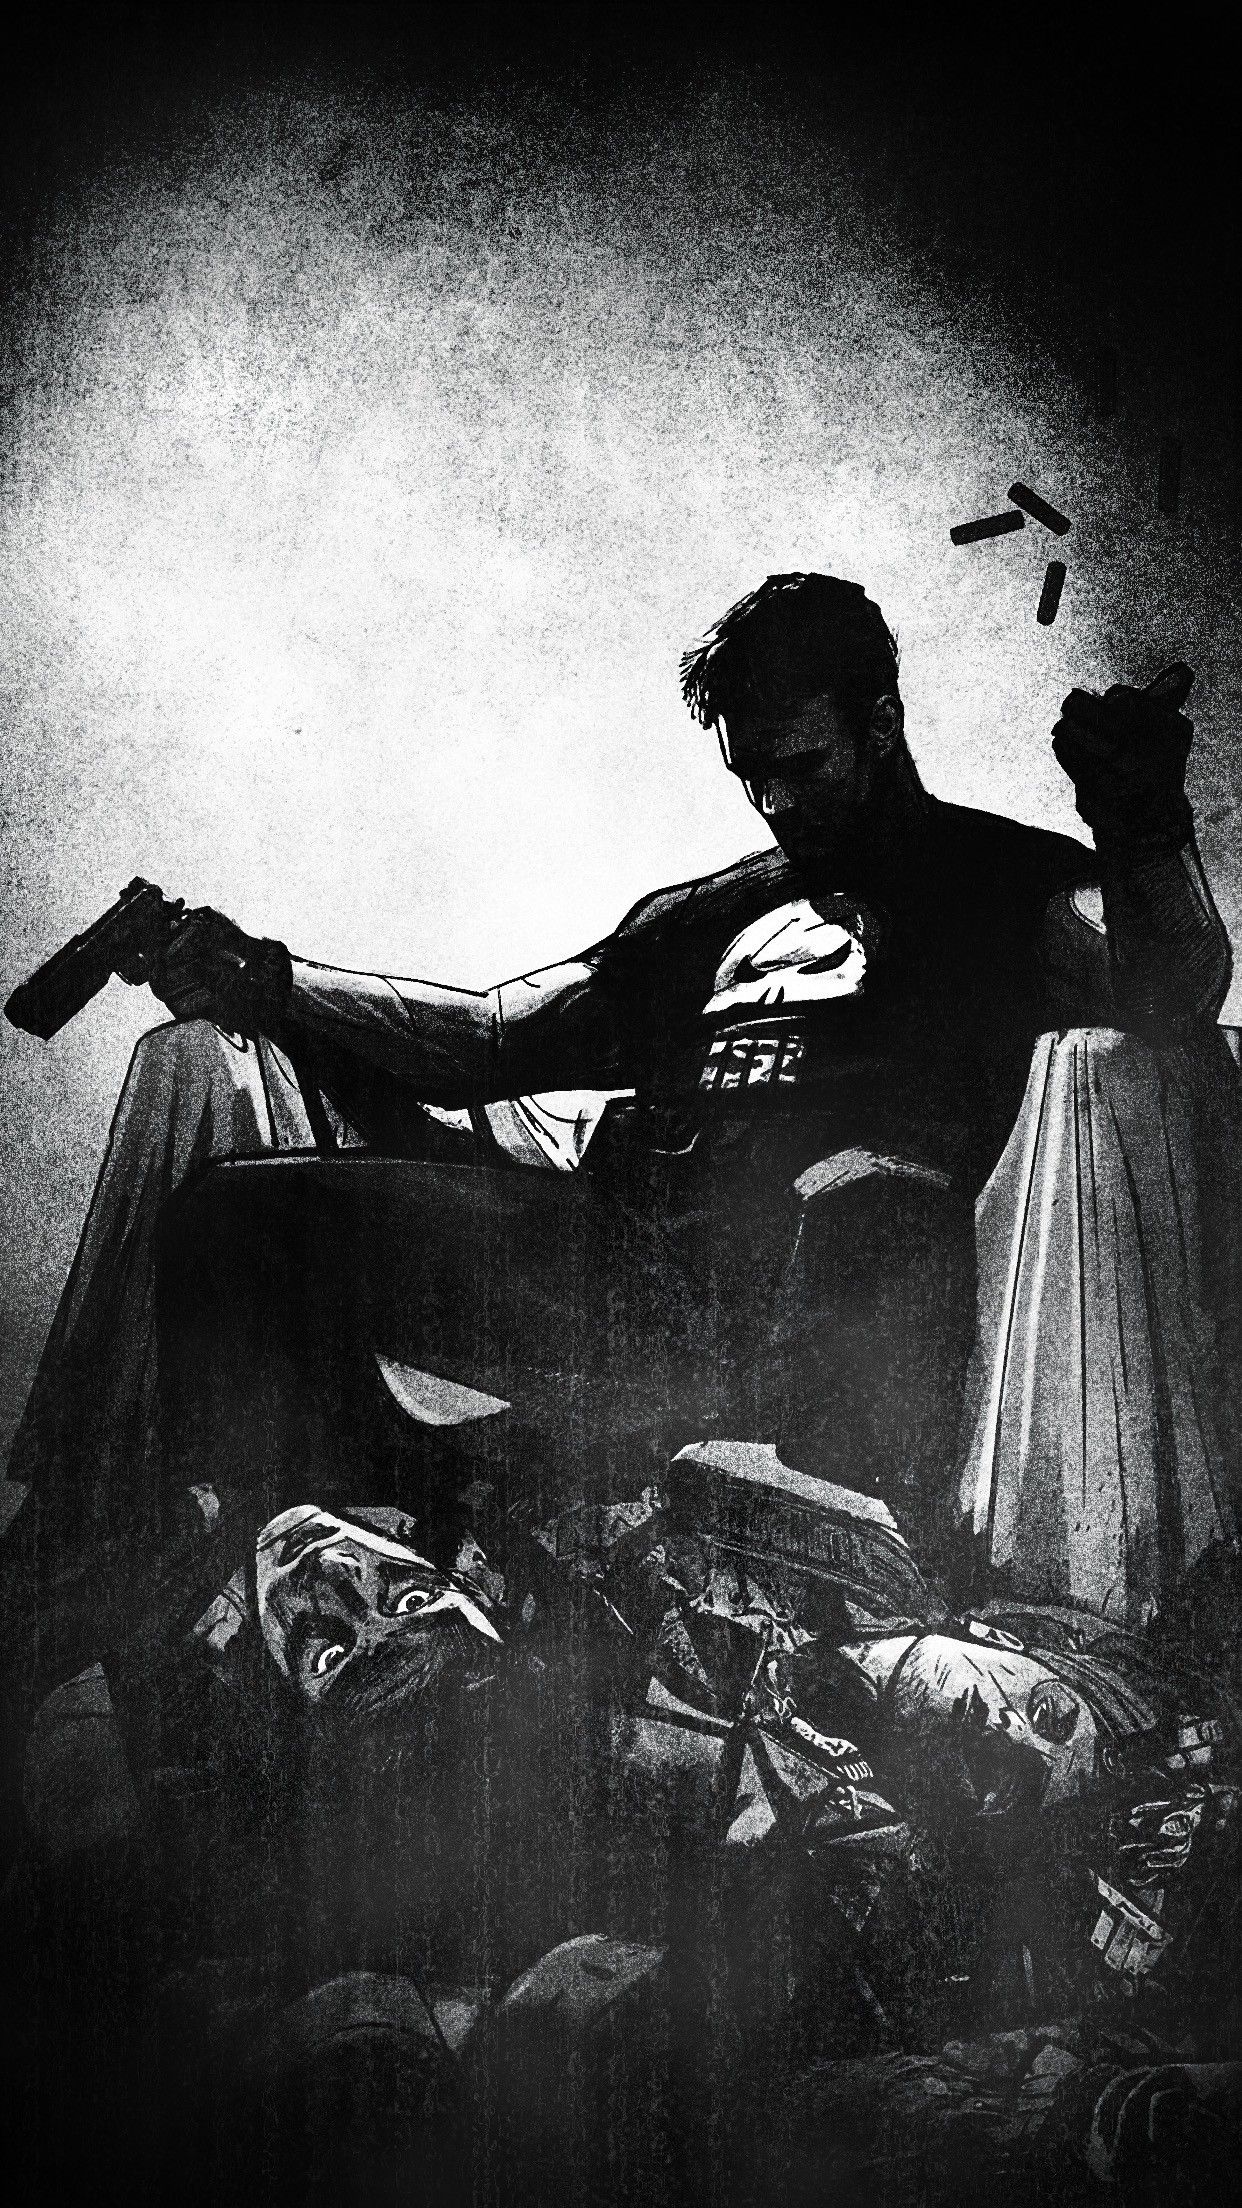 Punisher HD Wallpaper for Android